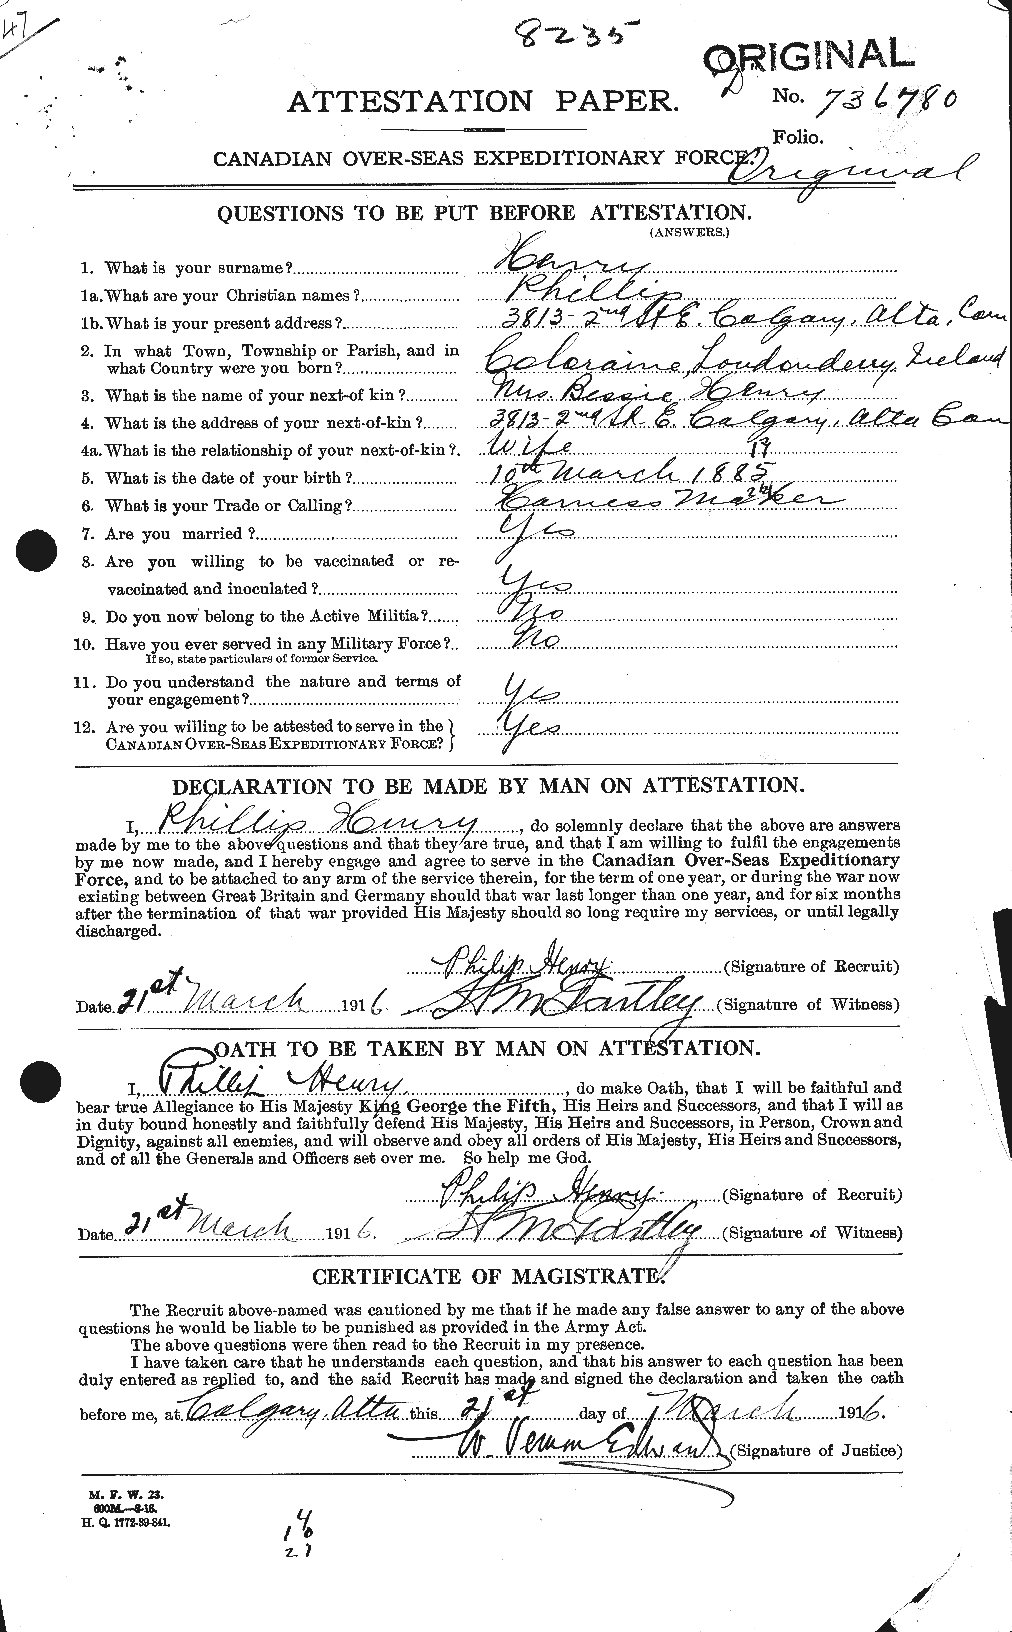 Personnel Records of the First World War - CEF 387689a